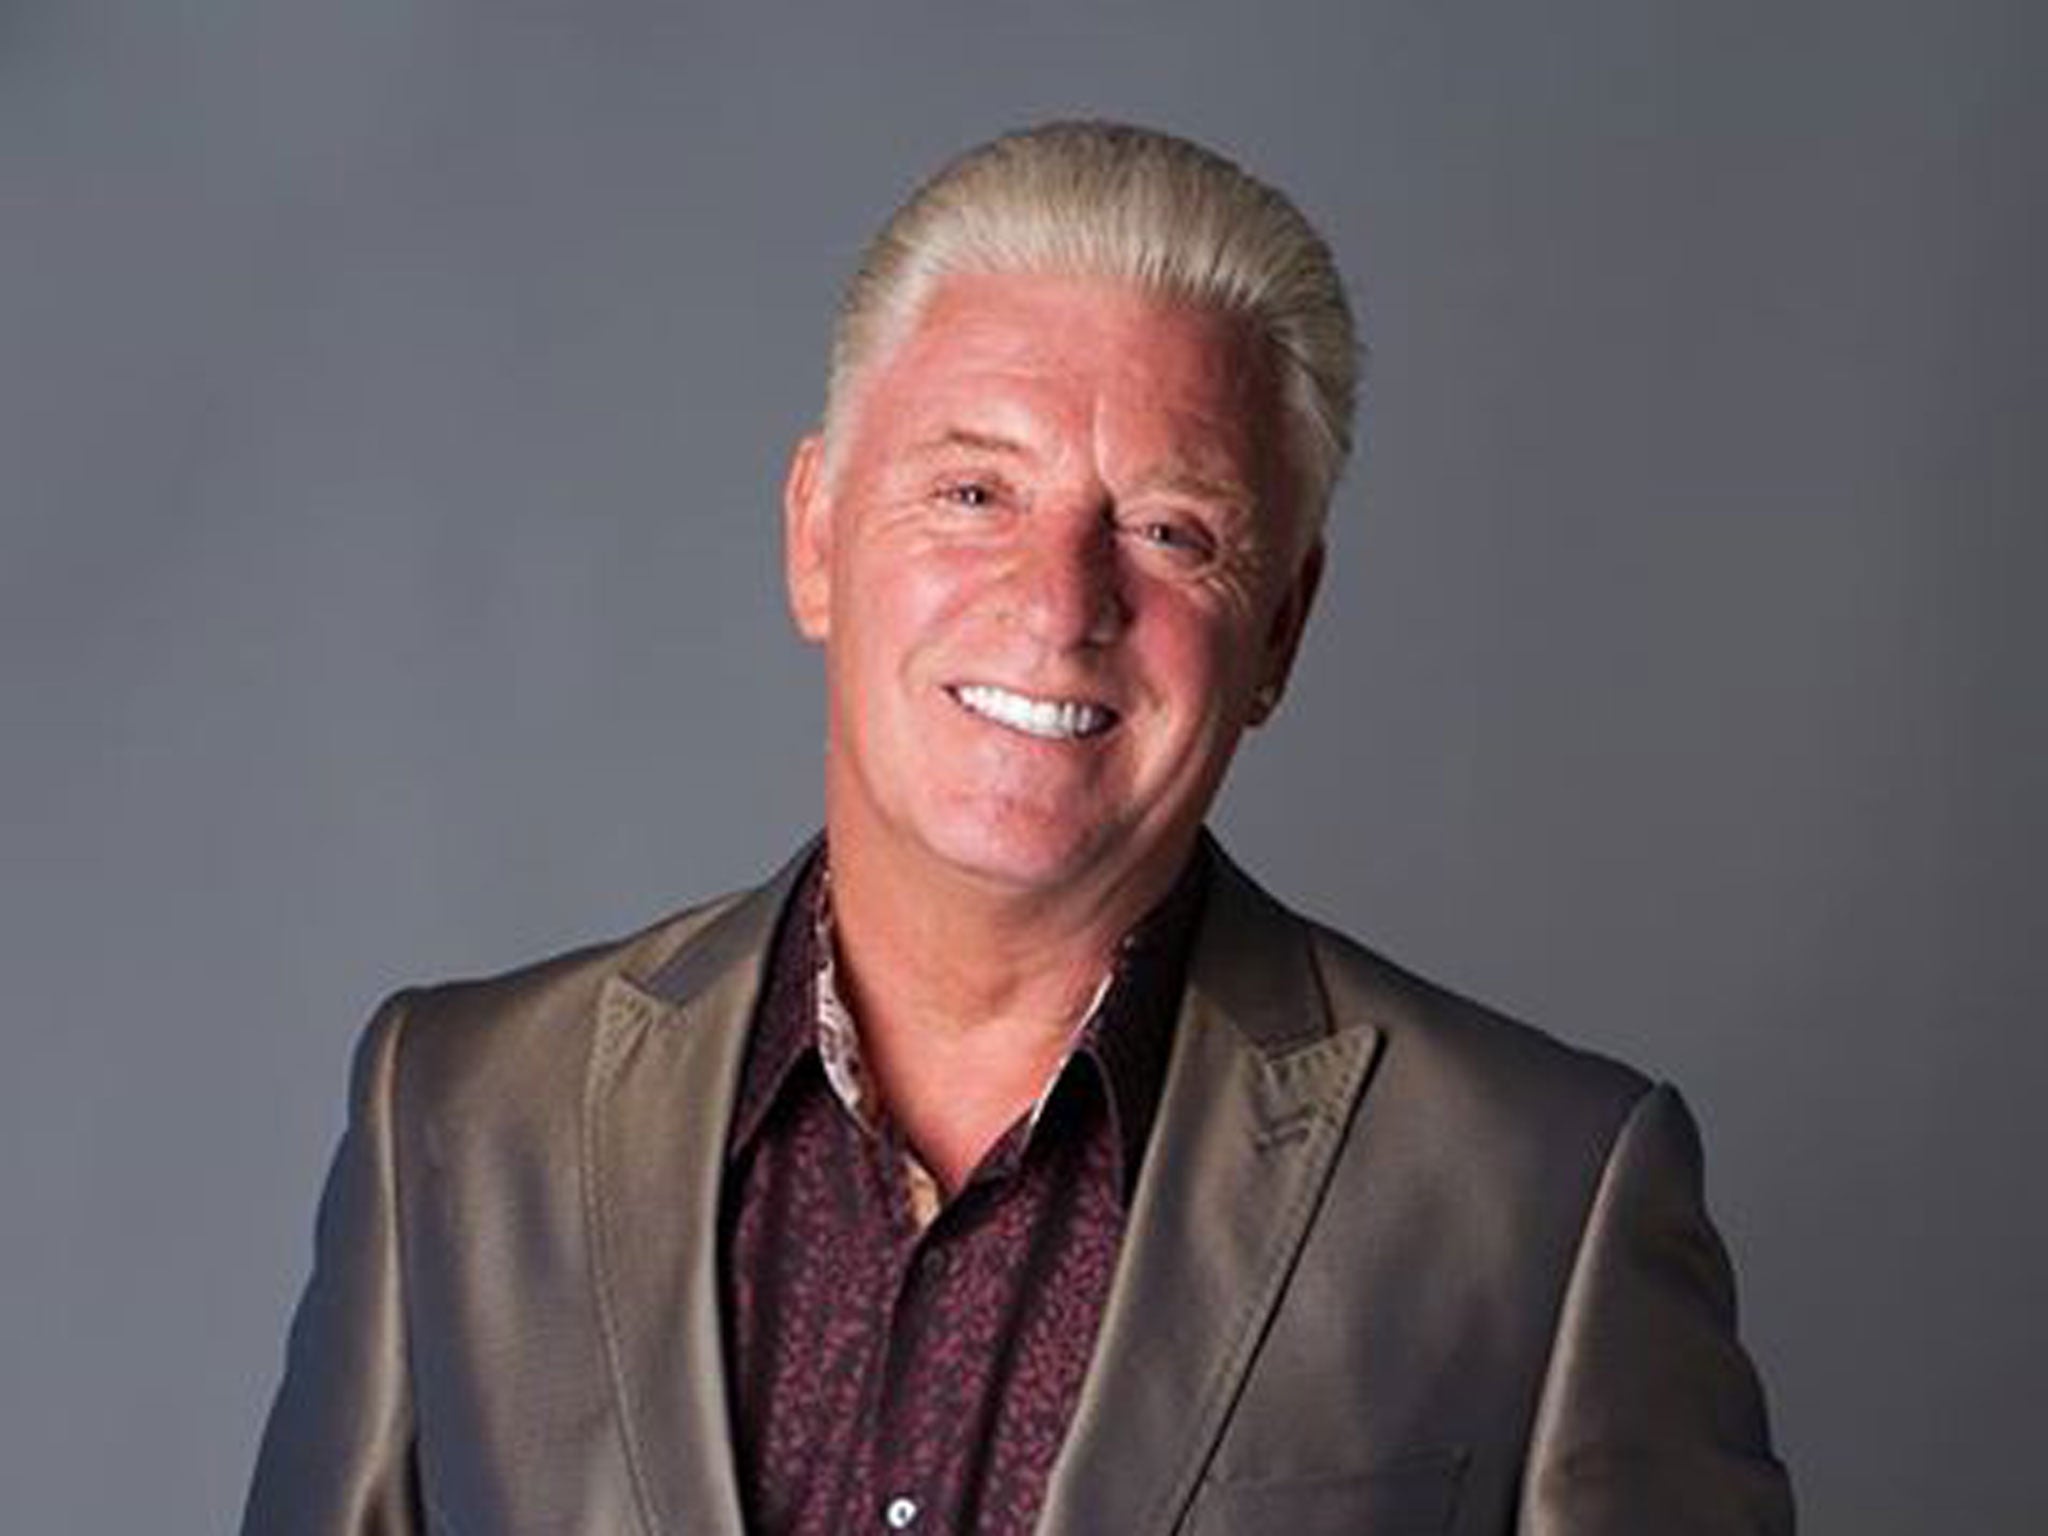 The TV psychic and host of Living's Most Haunted, Derek Acorah